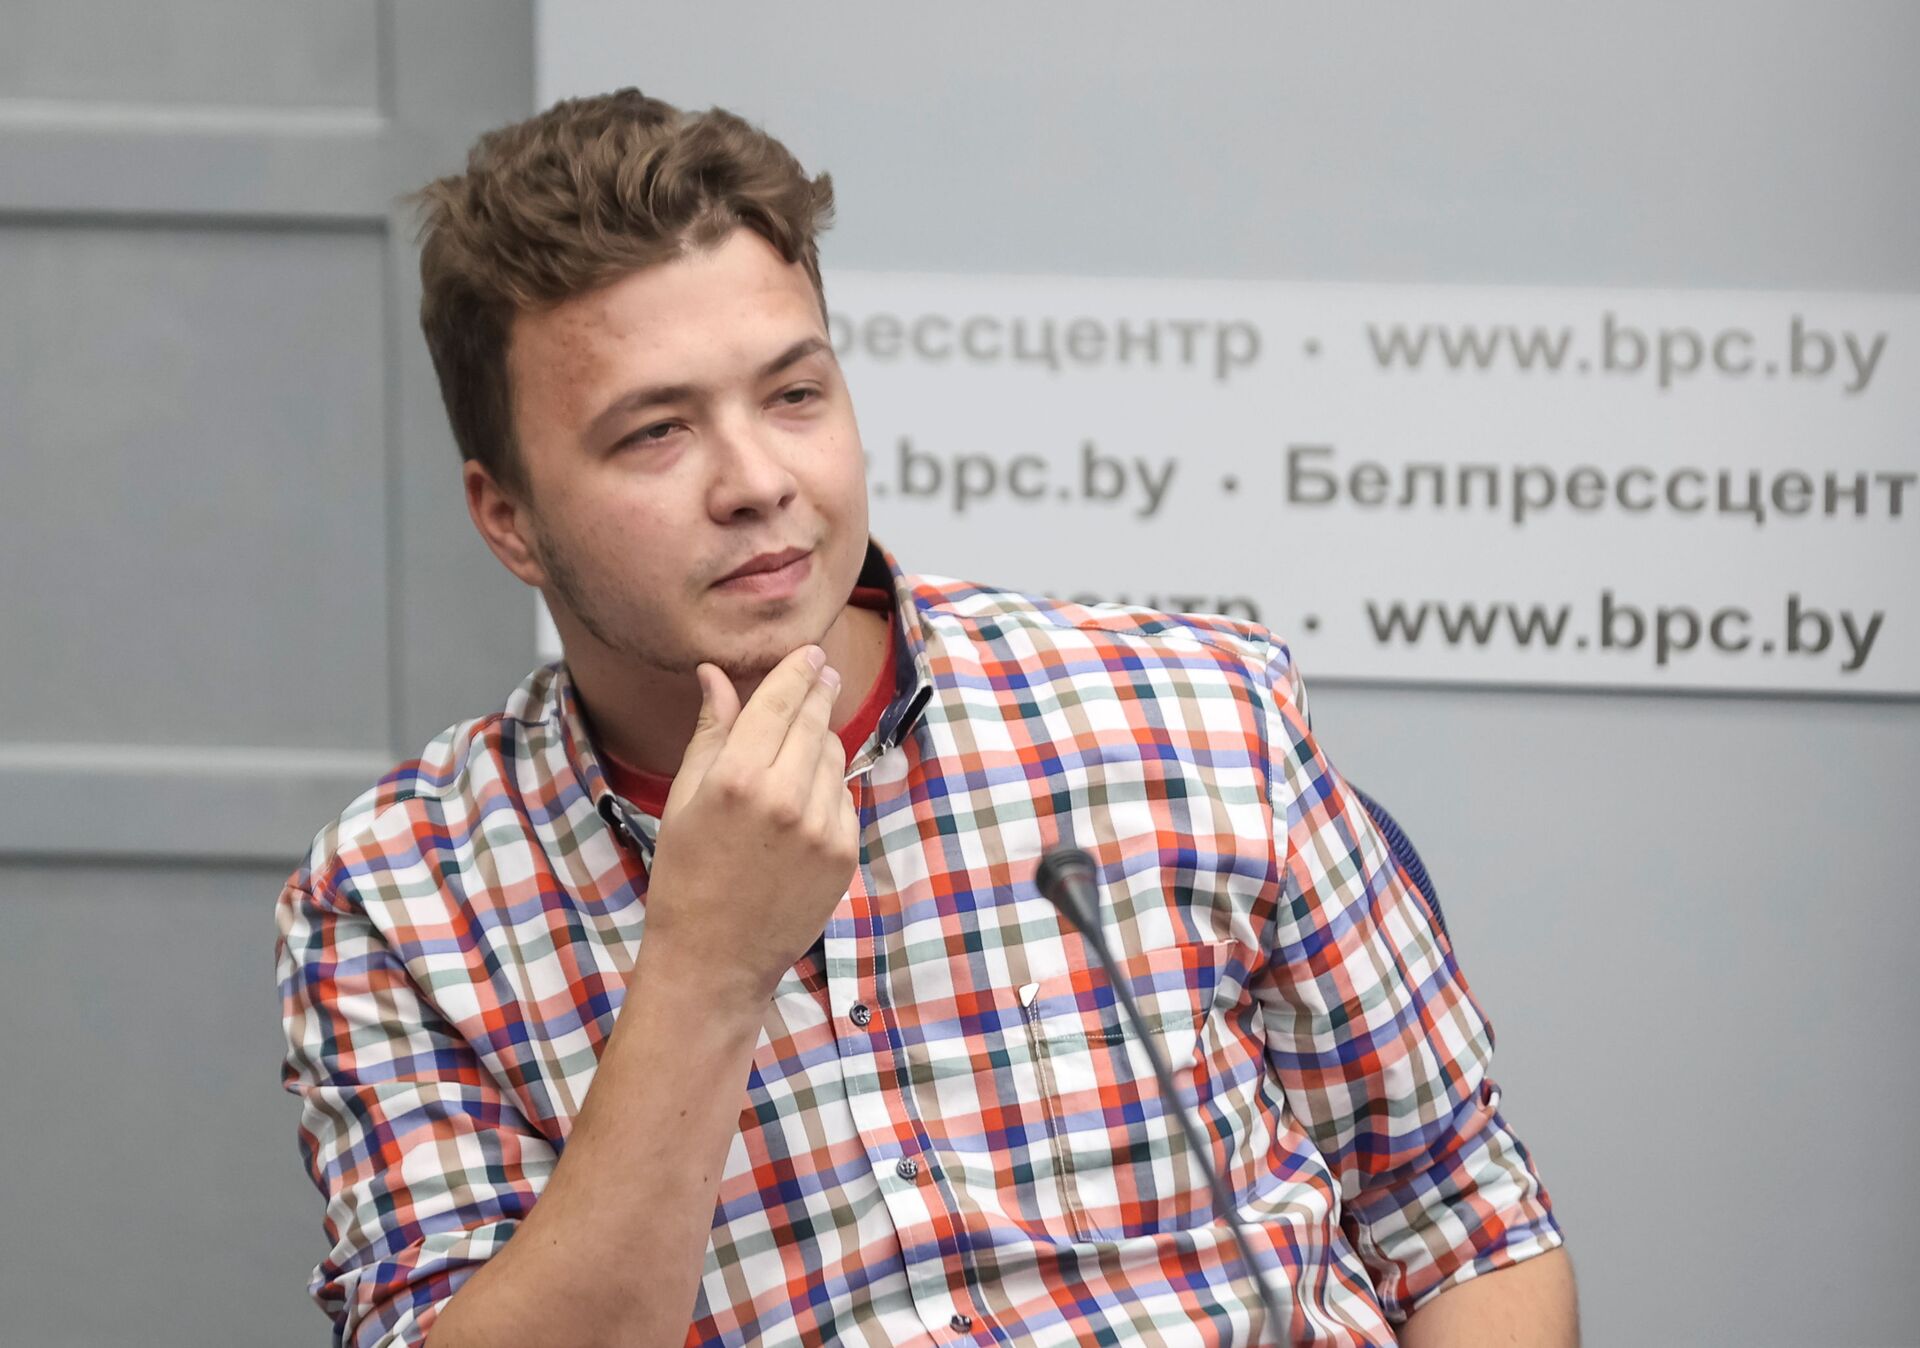 Jailed Belarus journalist Roman Protasevich takes part in a press conference about the forced landing of the Ryanair passenger plane on which he was travelling, in Minsk, Belarus June 14, 2021 - Sputnik International, 1920, 22.12.2021